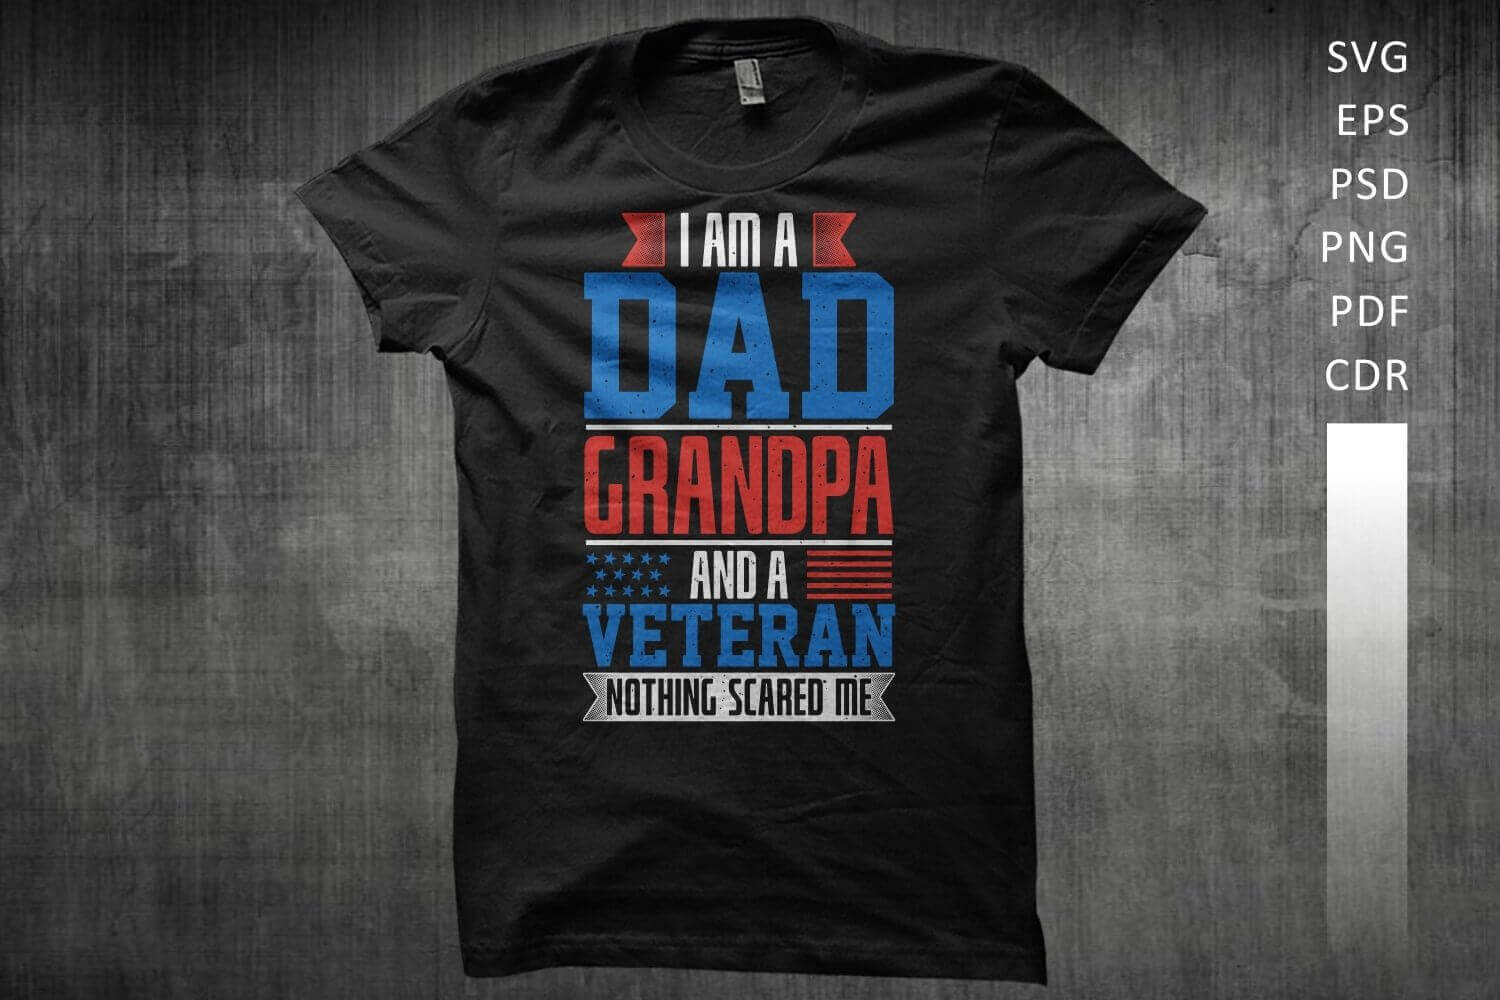 Black t-shirt with a color inscription "I'm a dad, a grandfather and a veteran, nothing scared me."